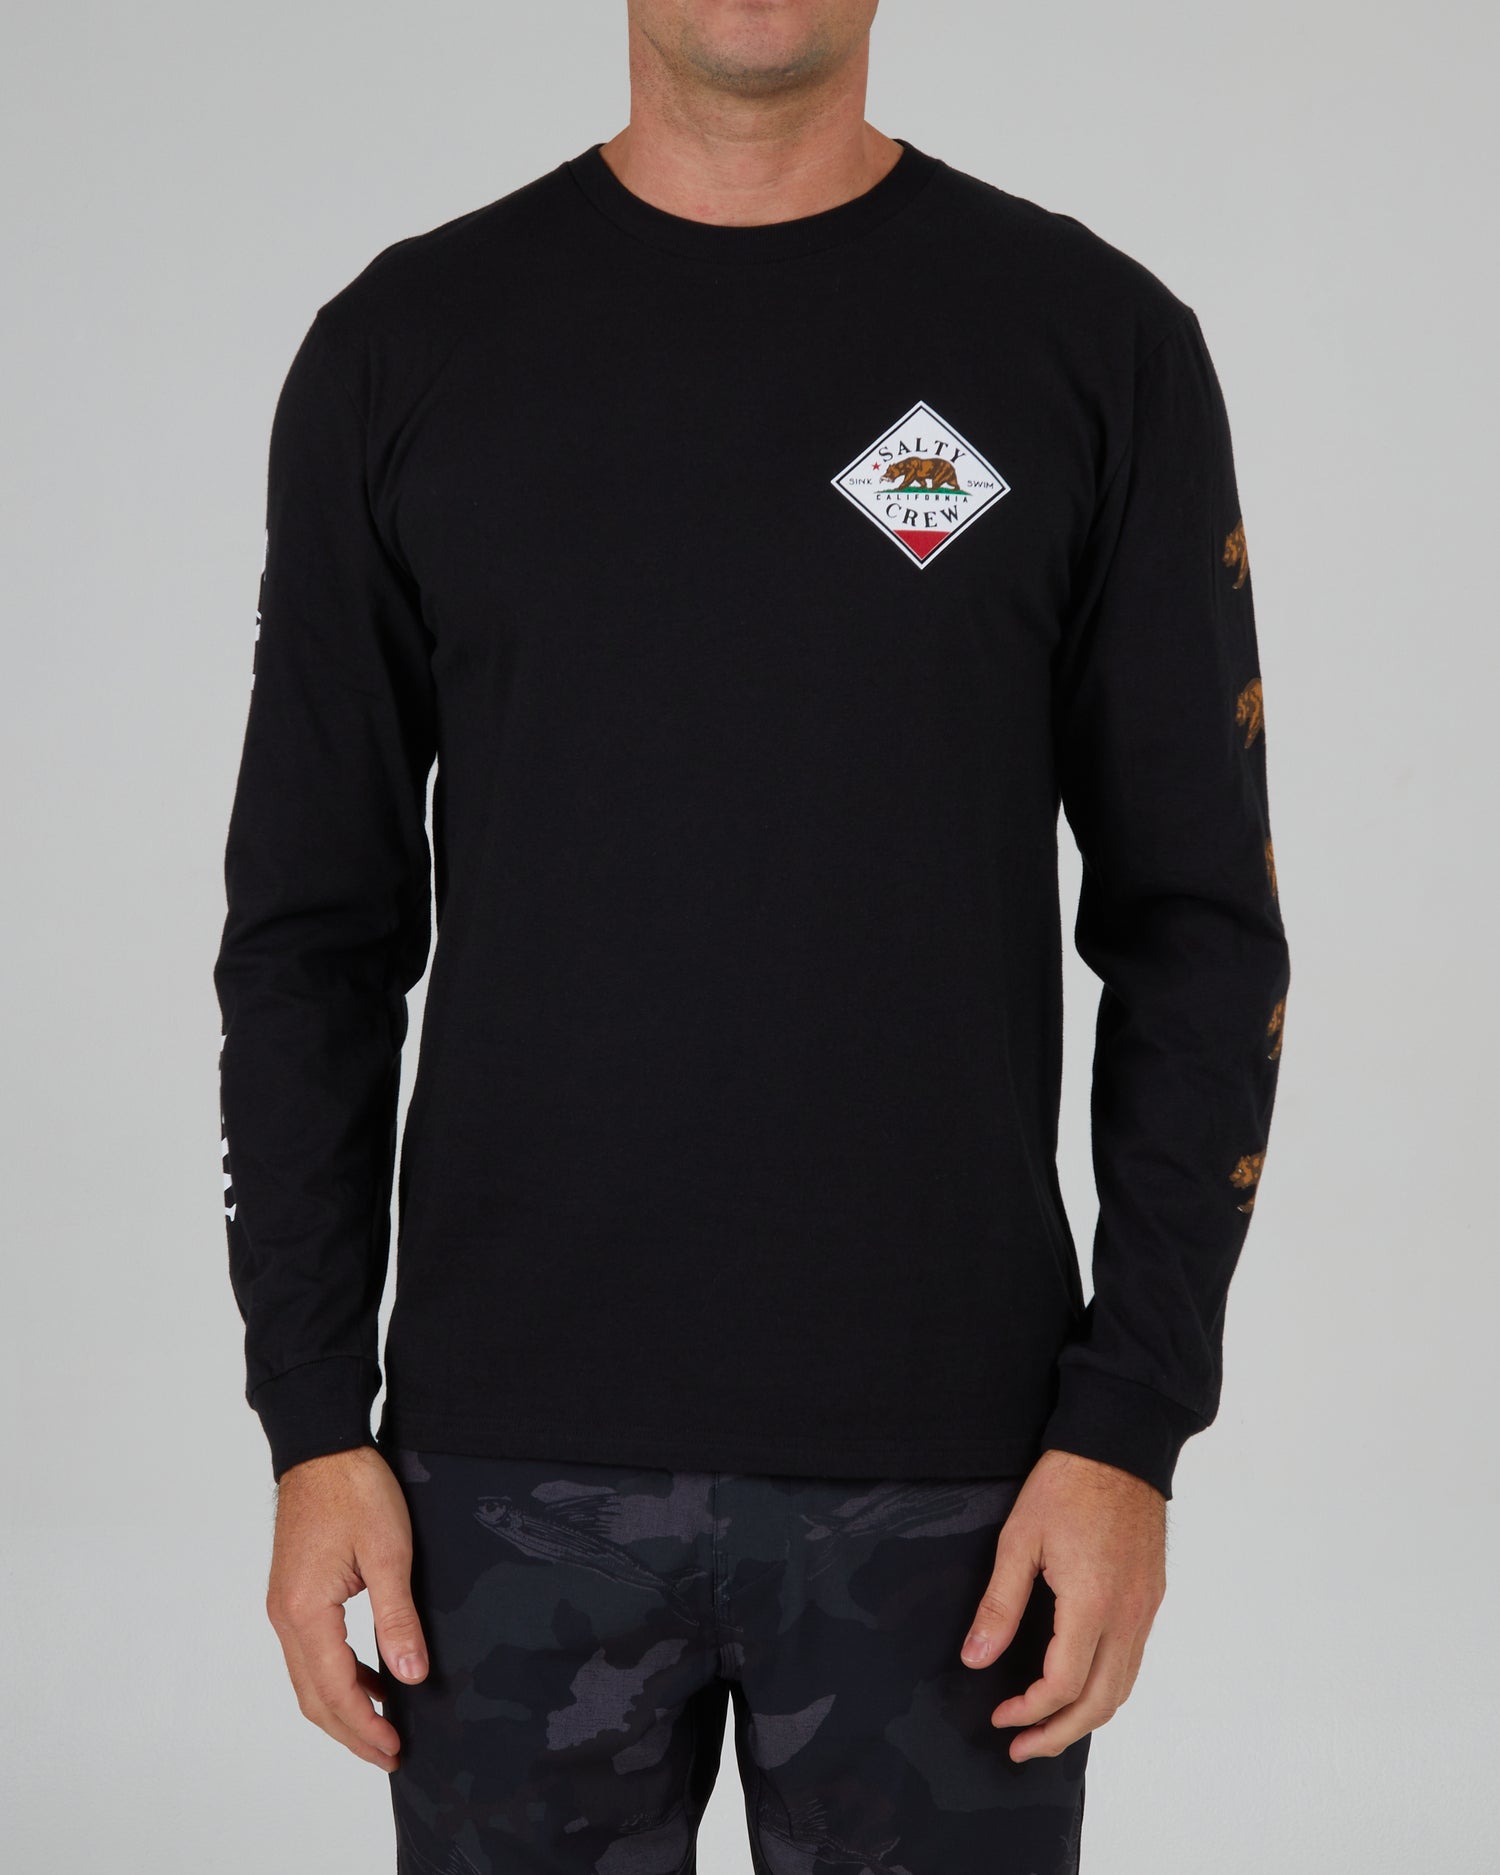 On body front of the Tippet Cali Black L/S Premium Tee